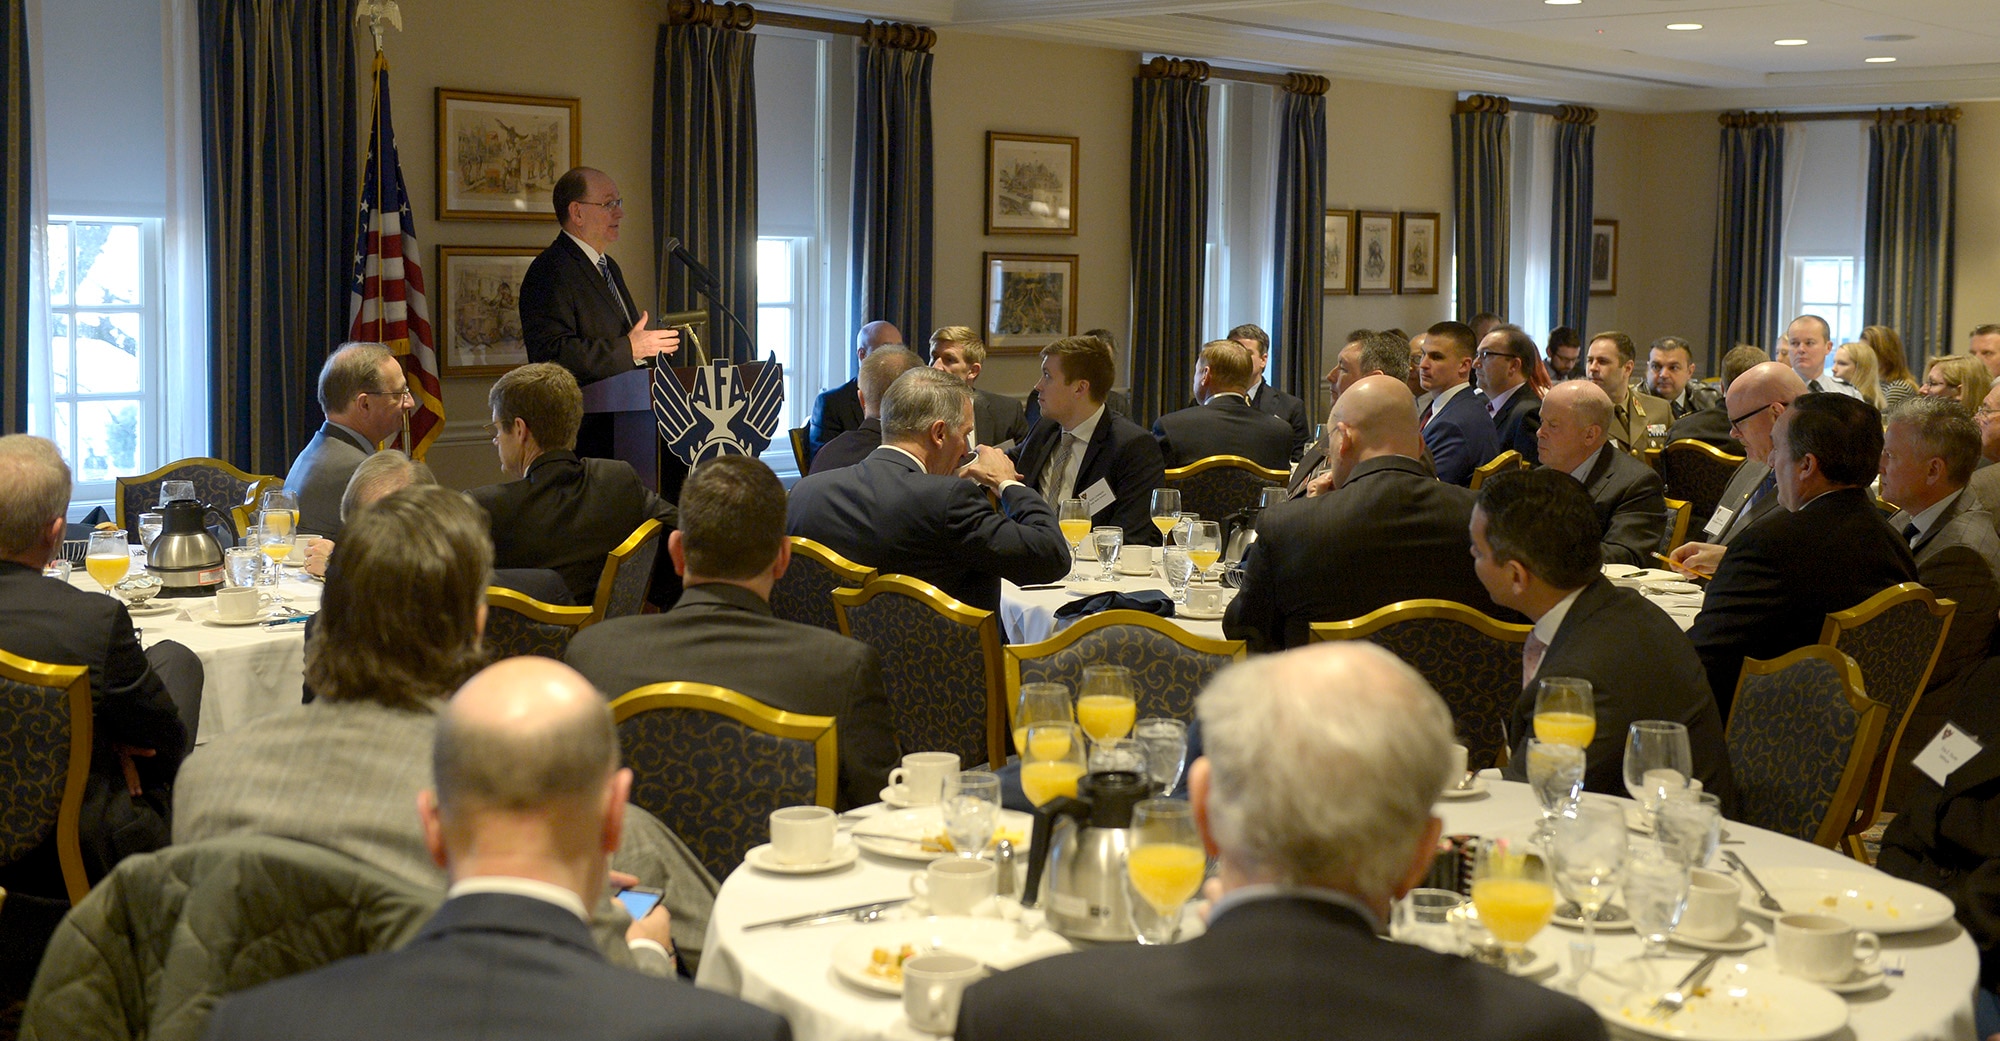 Undersecretary of the Air Force Matthew Donovan delivers the keynote speech during an Air Force Association breakfast Jan. 18, 2018, Washington, D.C. Donovan addressed variety of issues facing the Air Force. (U.S. Air Force photo by Staff Sgt. Rusty Frank)